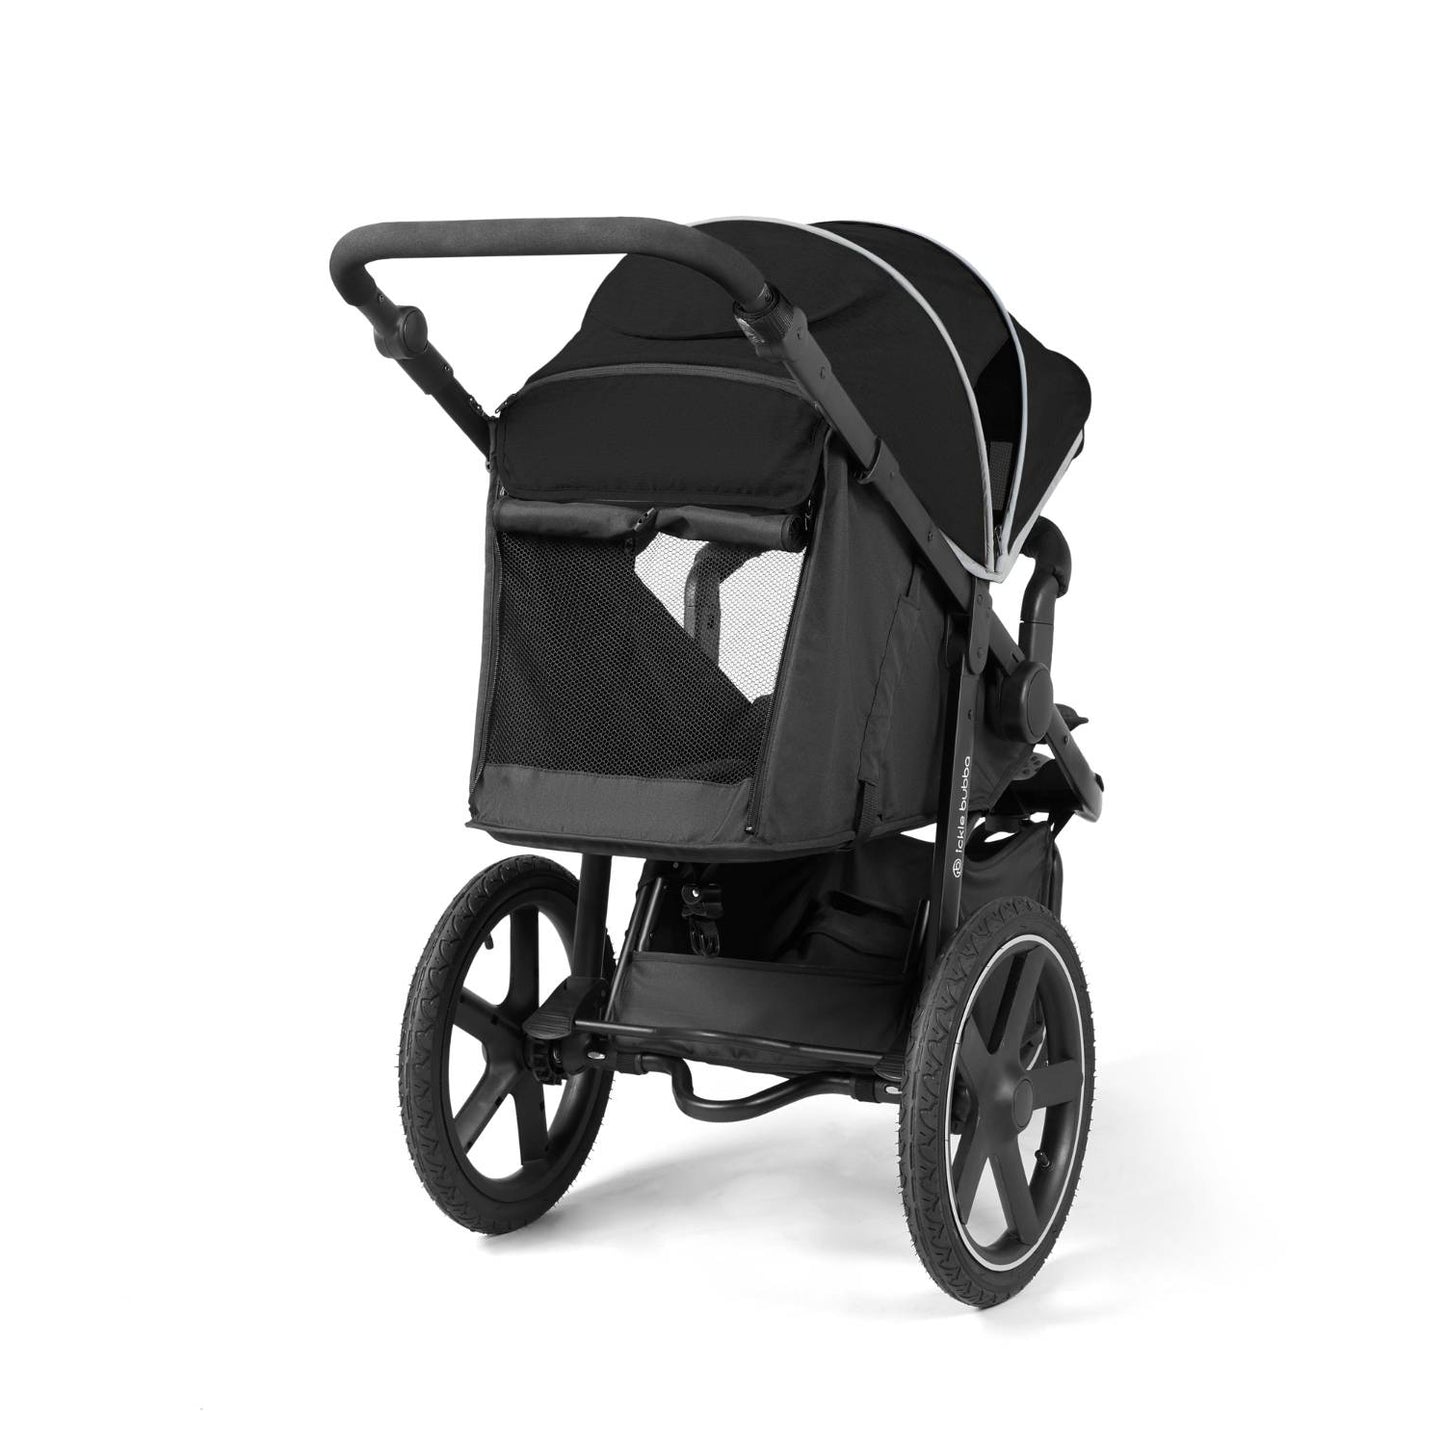 Roll-up ventilation panel at the back of Ickle Bubba Venus Max Jogger Stroller in Black colour